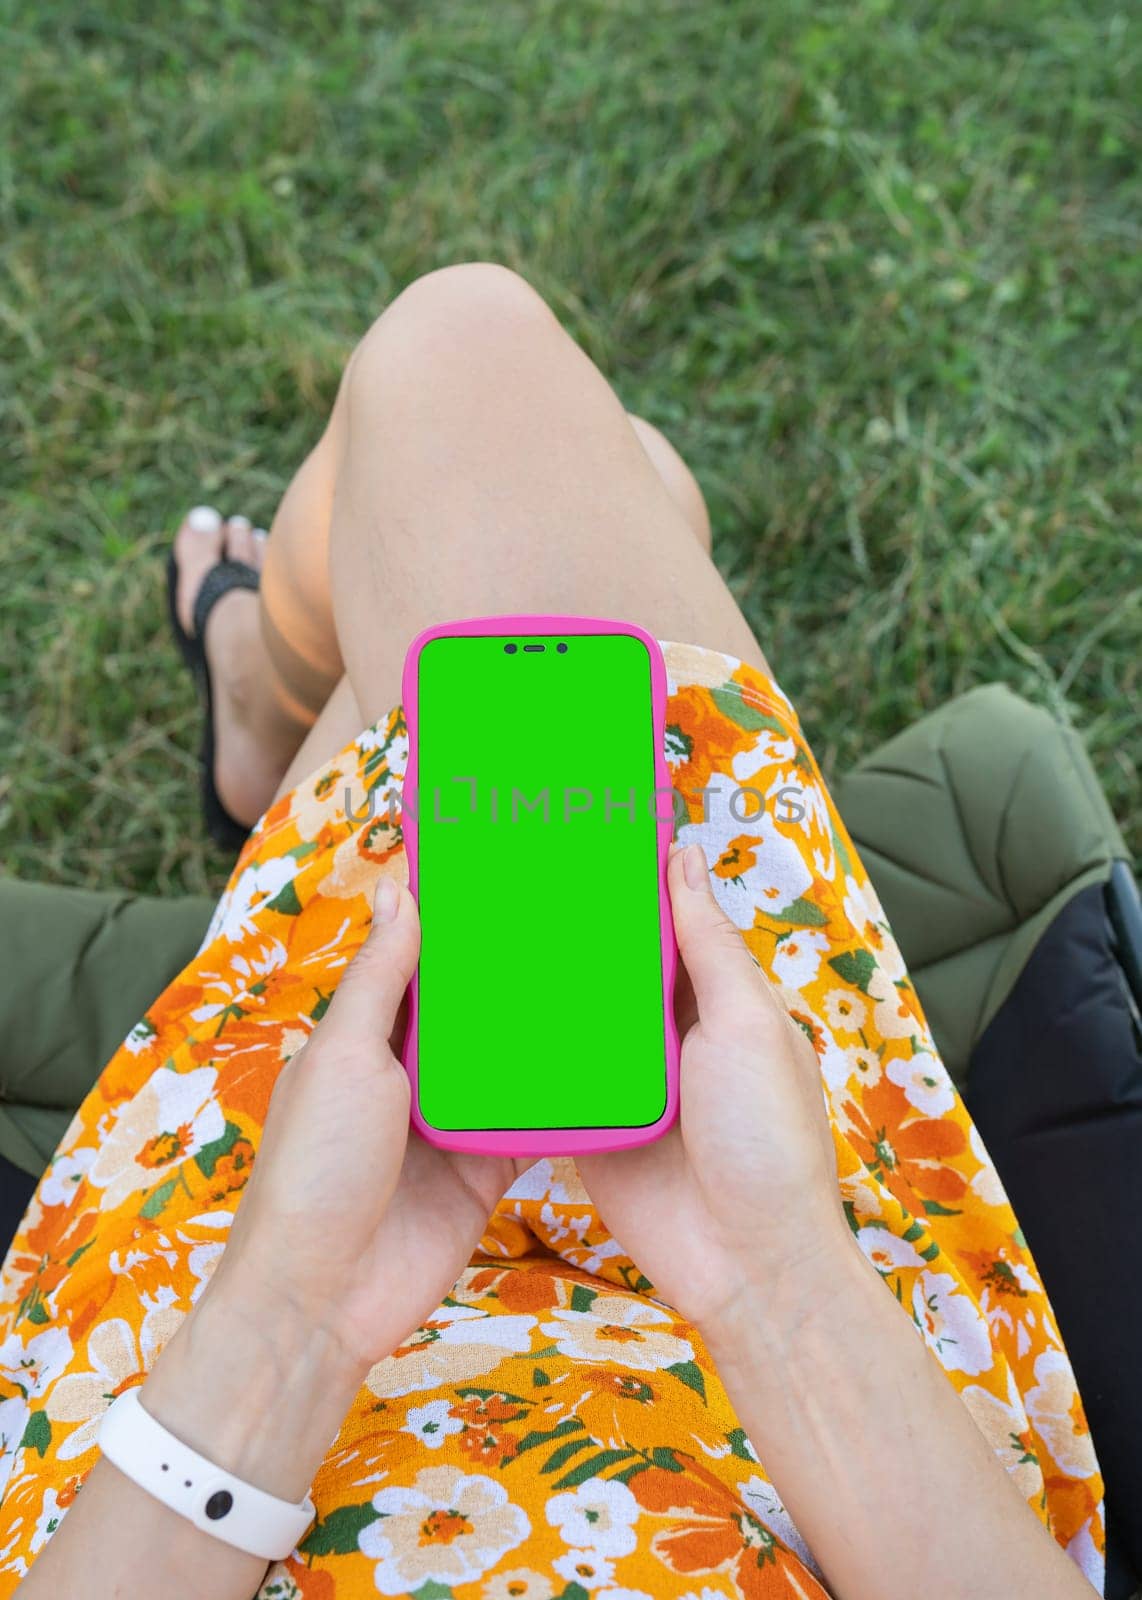 A girl in a floral dress holds a smartphone with a green screen and sits on the grass. Template, place for inscription